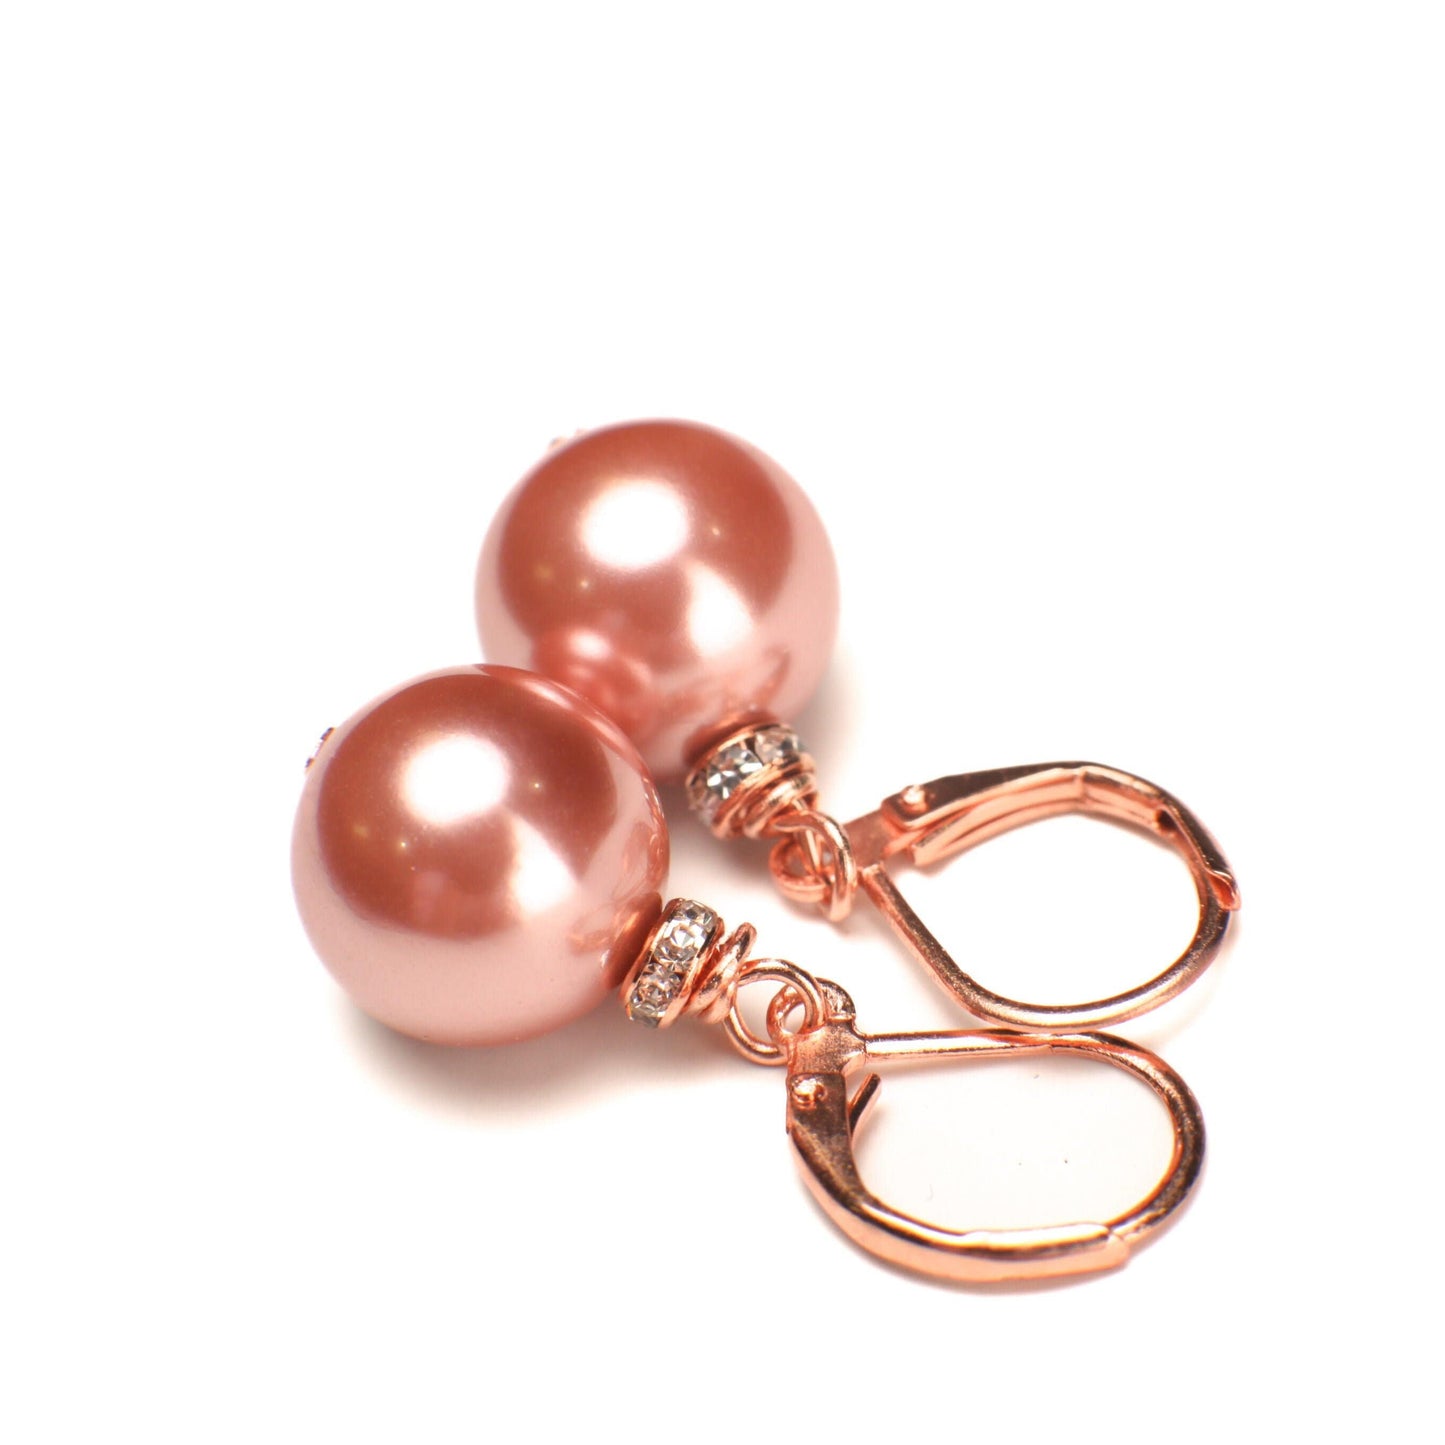 Copper Pink South Sea Shell Pearl 12mm High Luster Earrings, CZ Rhinestone Spacer, Rose Gold Leverback, Bridal, Gift for Her